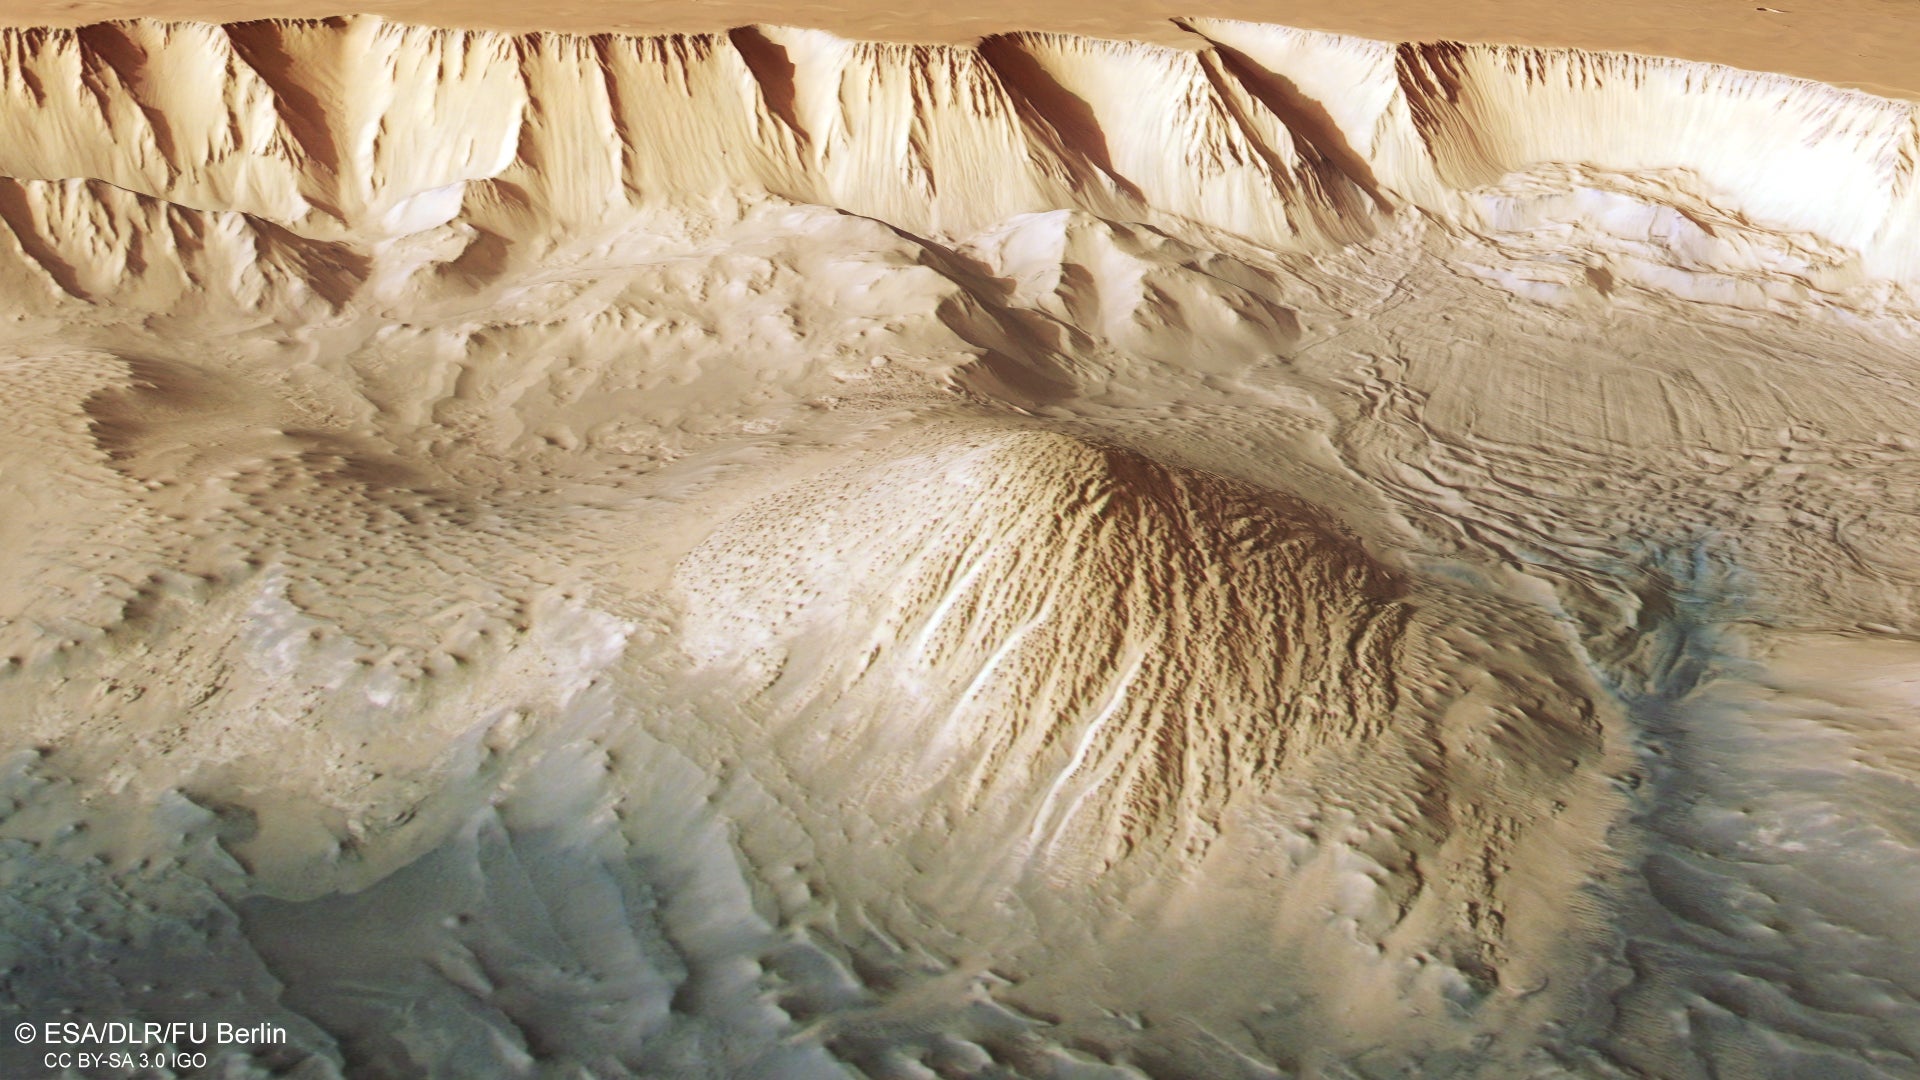 Perspective view of Tithonium Chasma, generated from data gathered by the Mars Express Orbiter. (Image: ESA/DLR/FU Berlin)